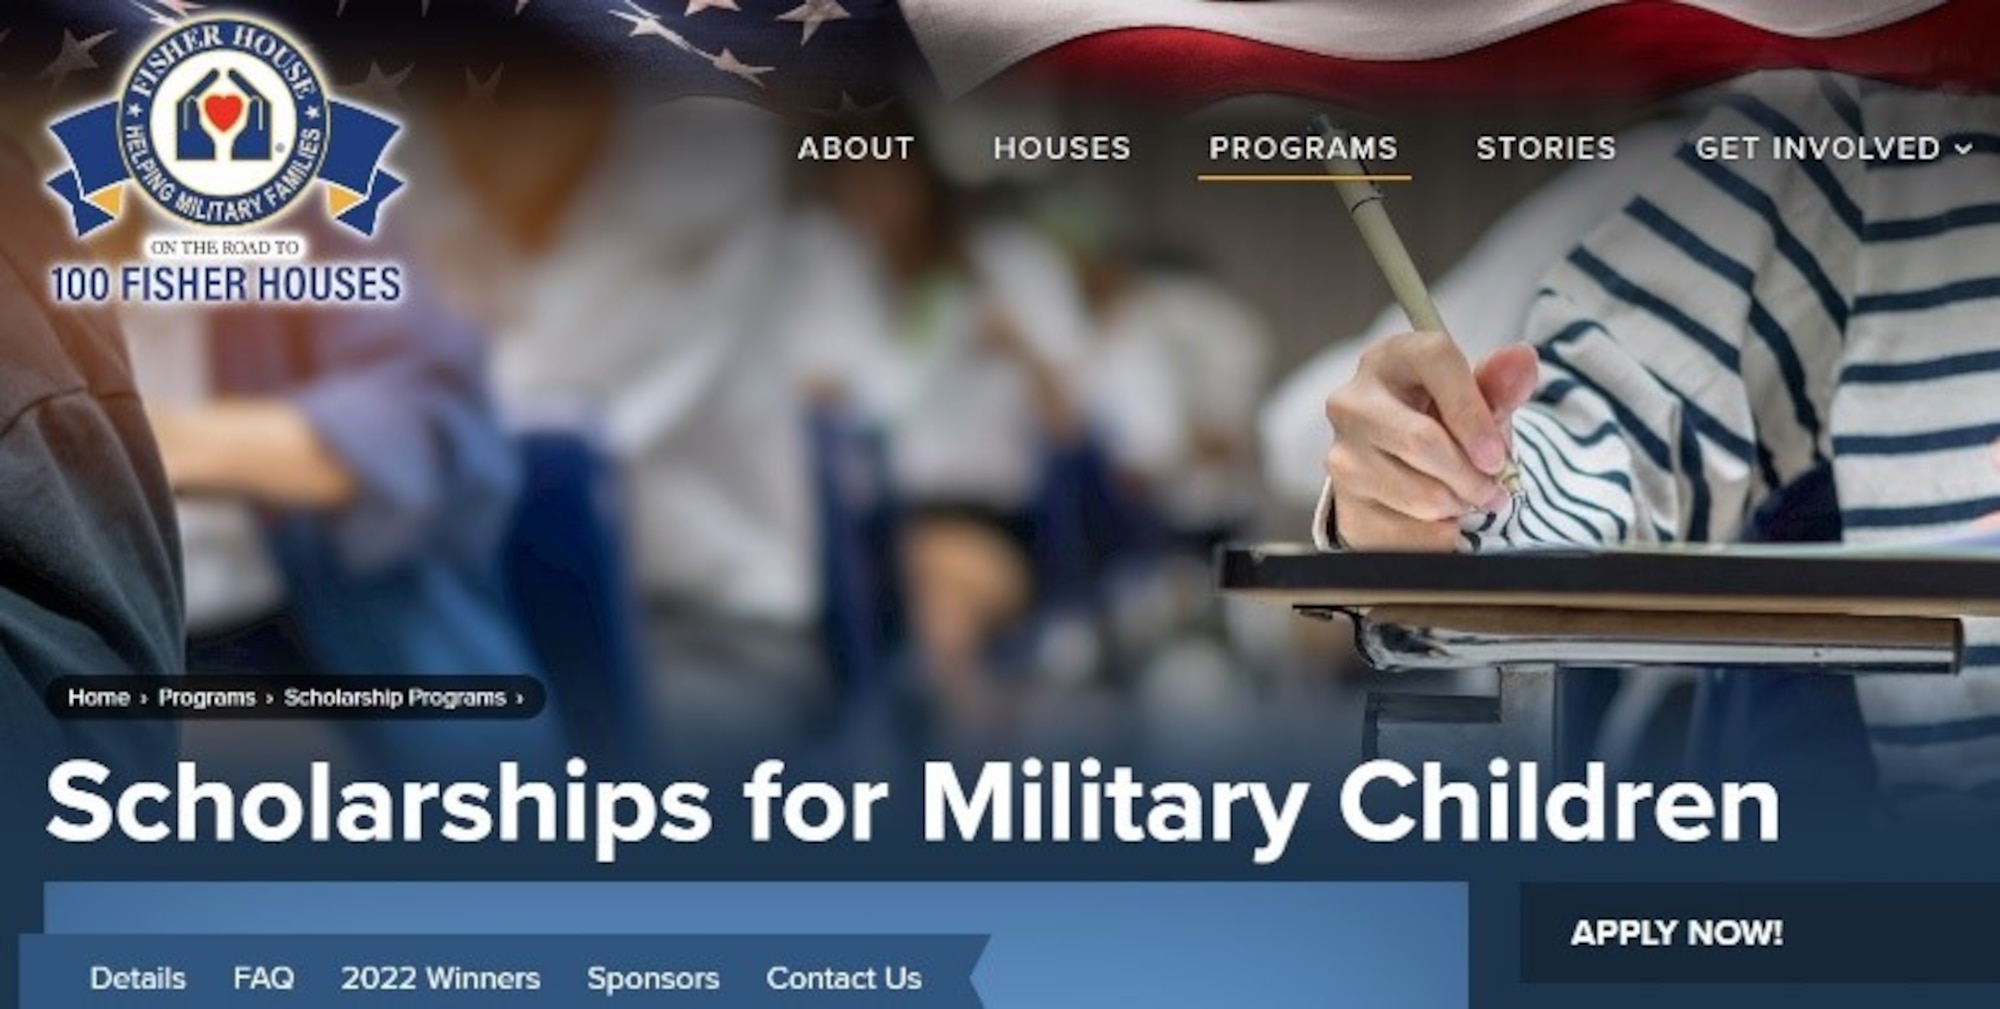 Scholarships for Military Children program accepting applications